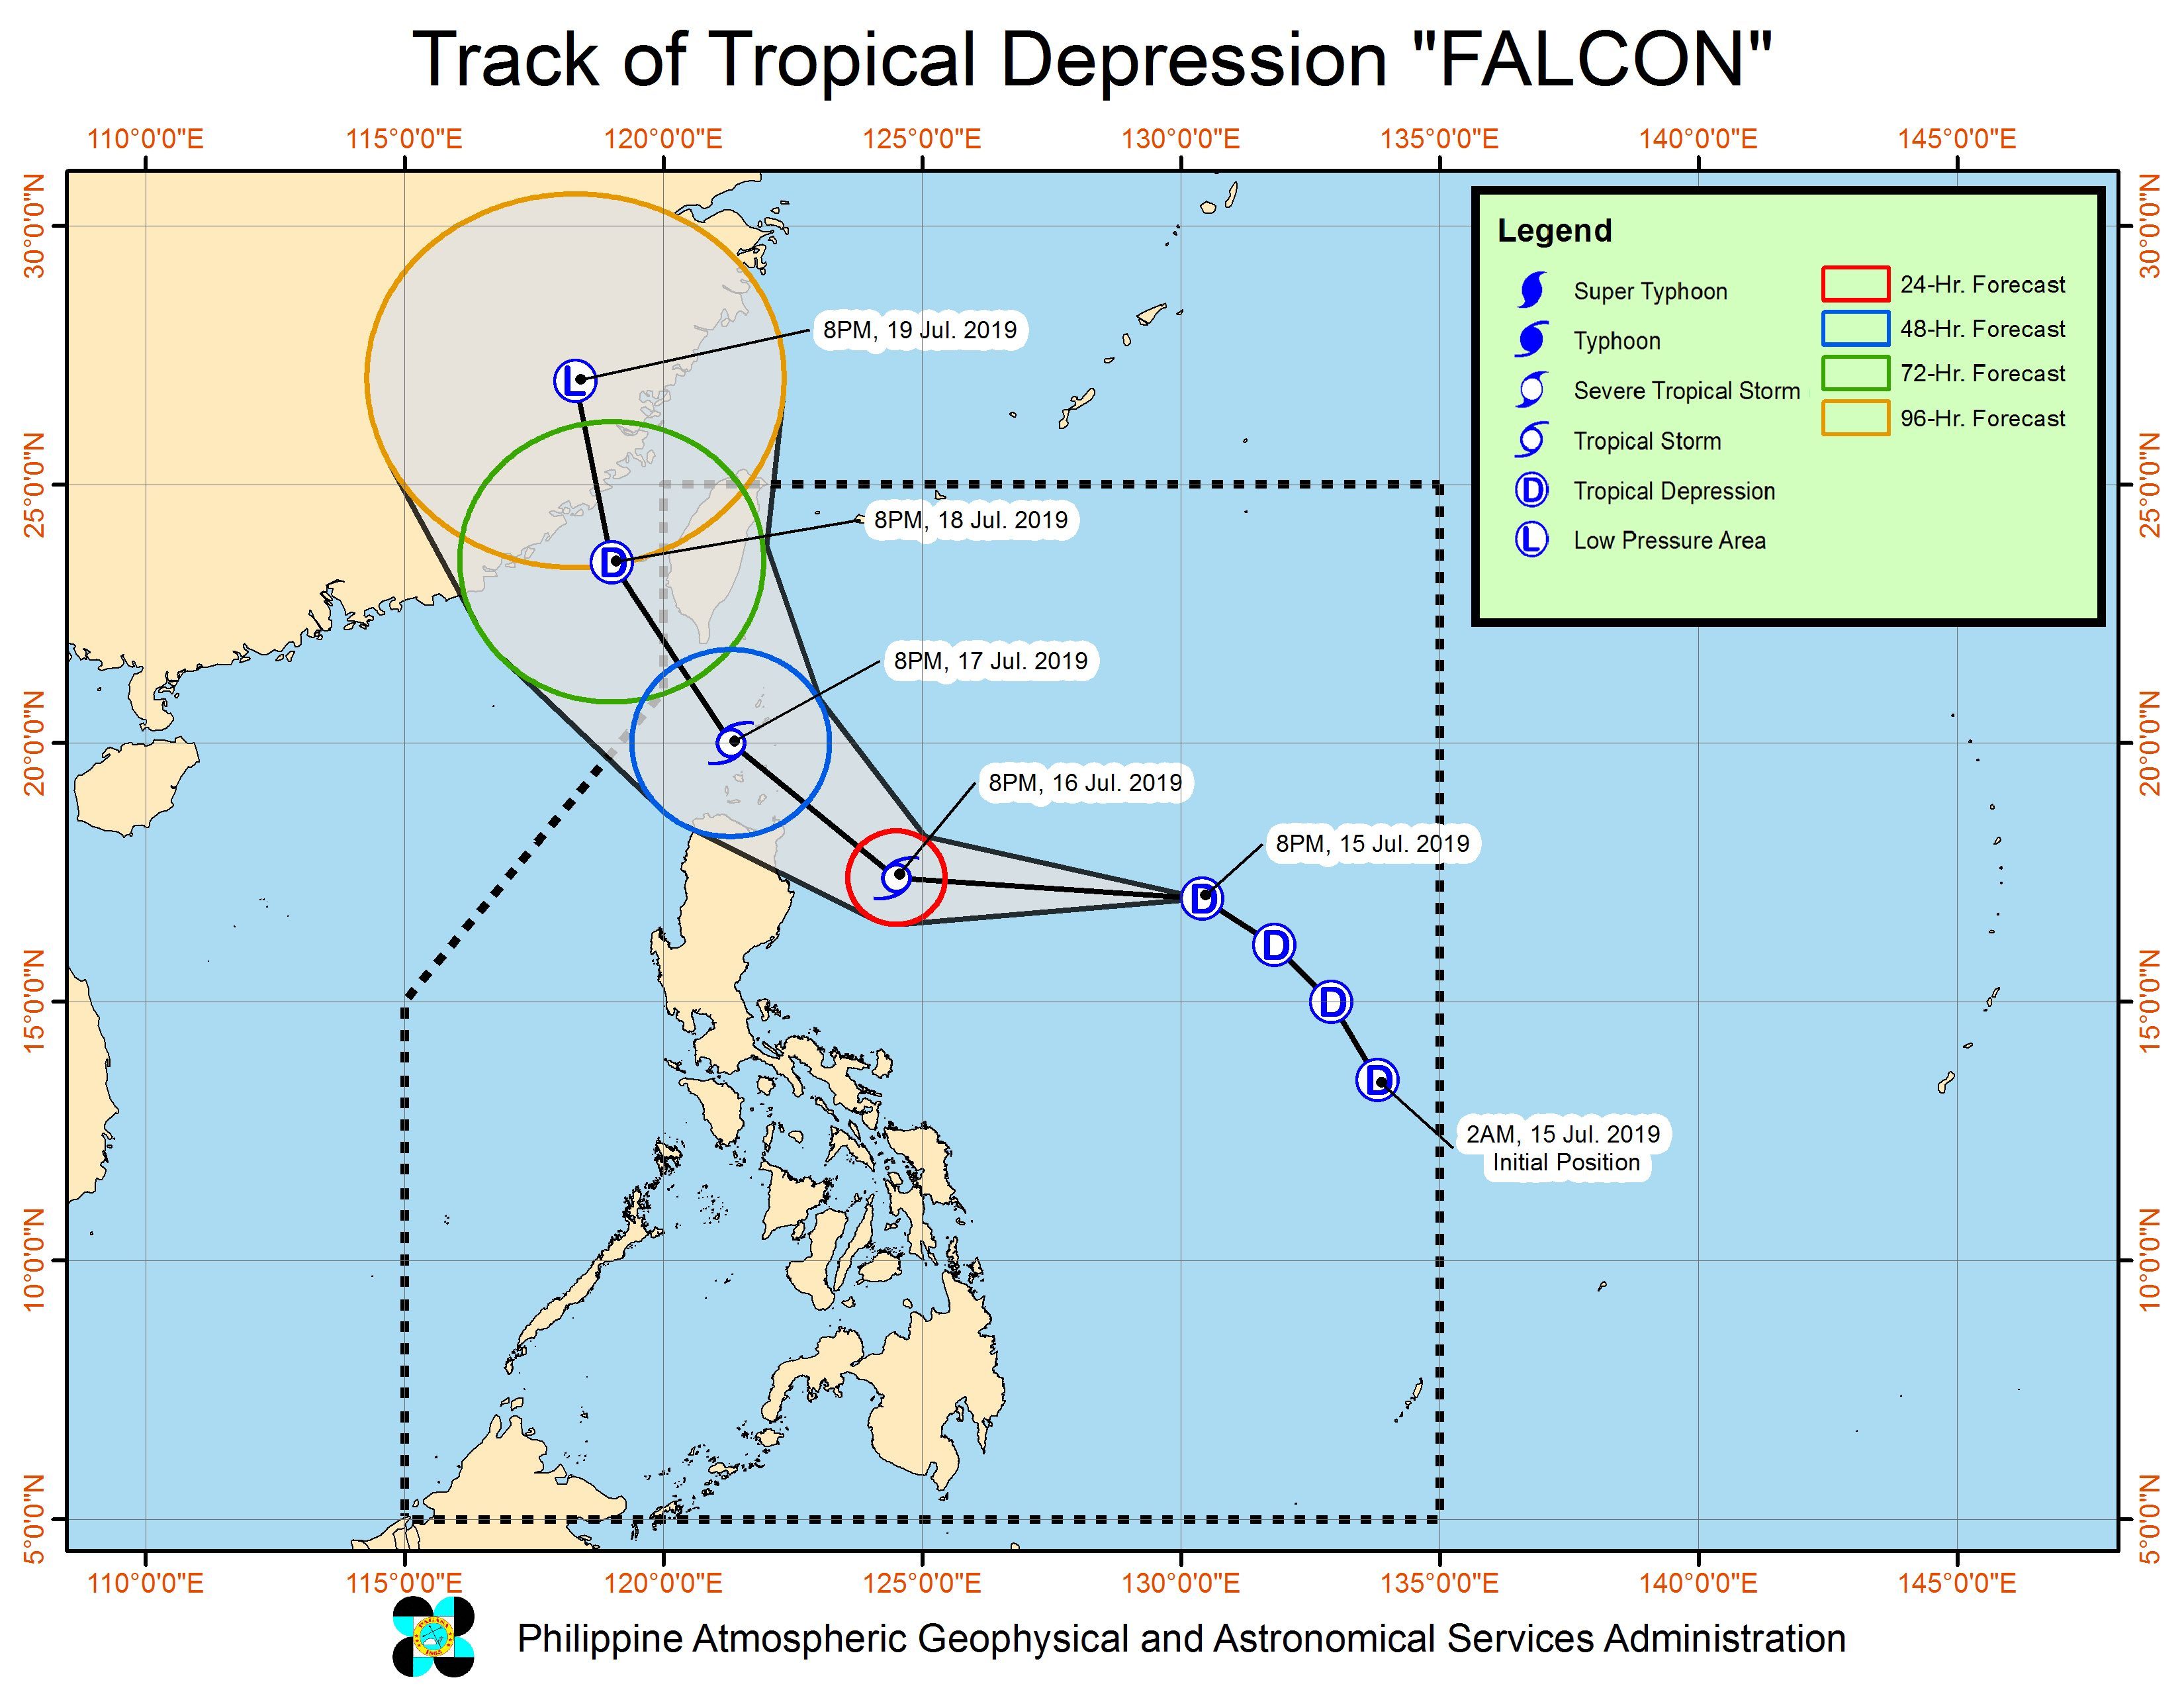 Forecast track of Tropical Depression Falcon as of July 15, 2019, 11 pm. Image from PAGASA 